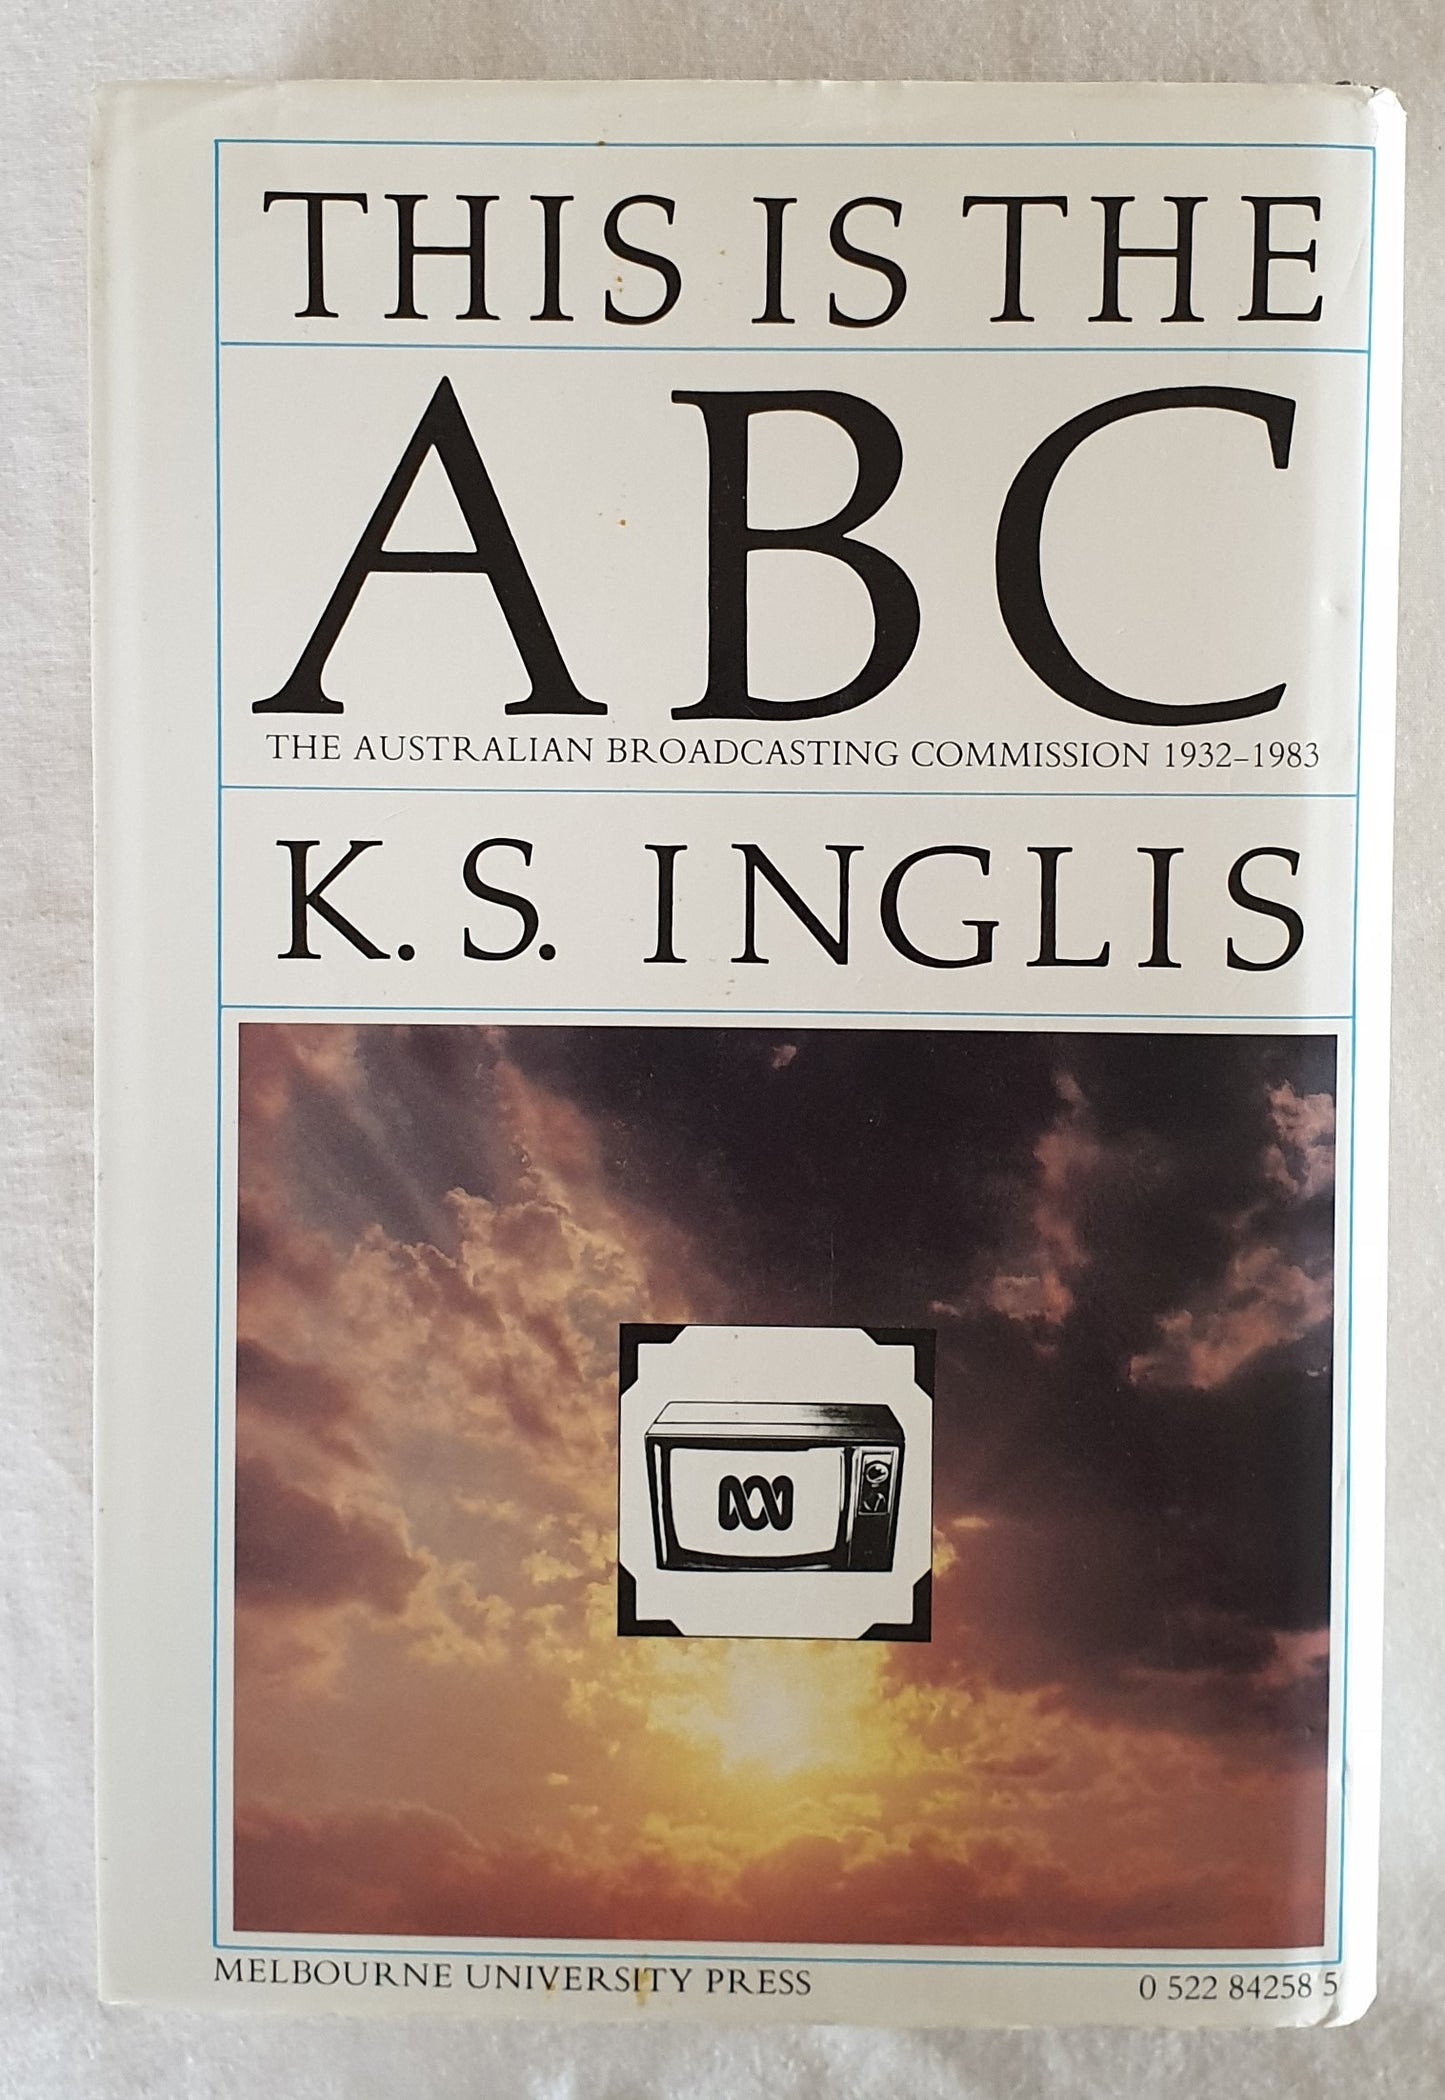 This is the ABC by K. S. Inglis